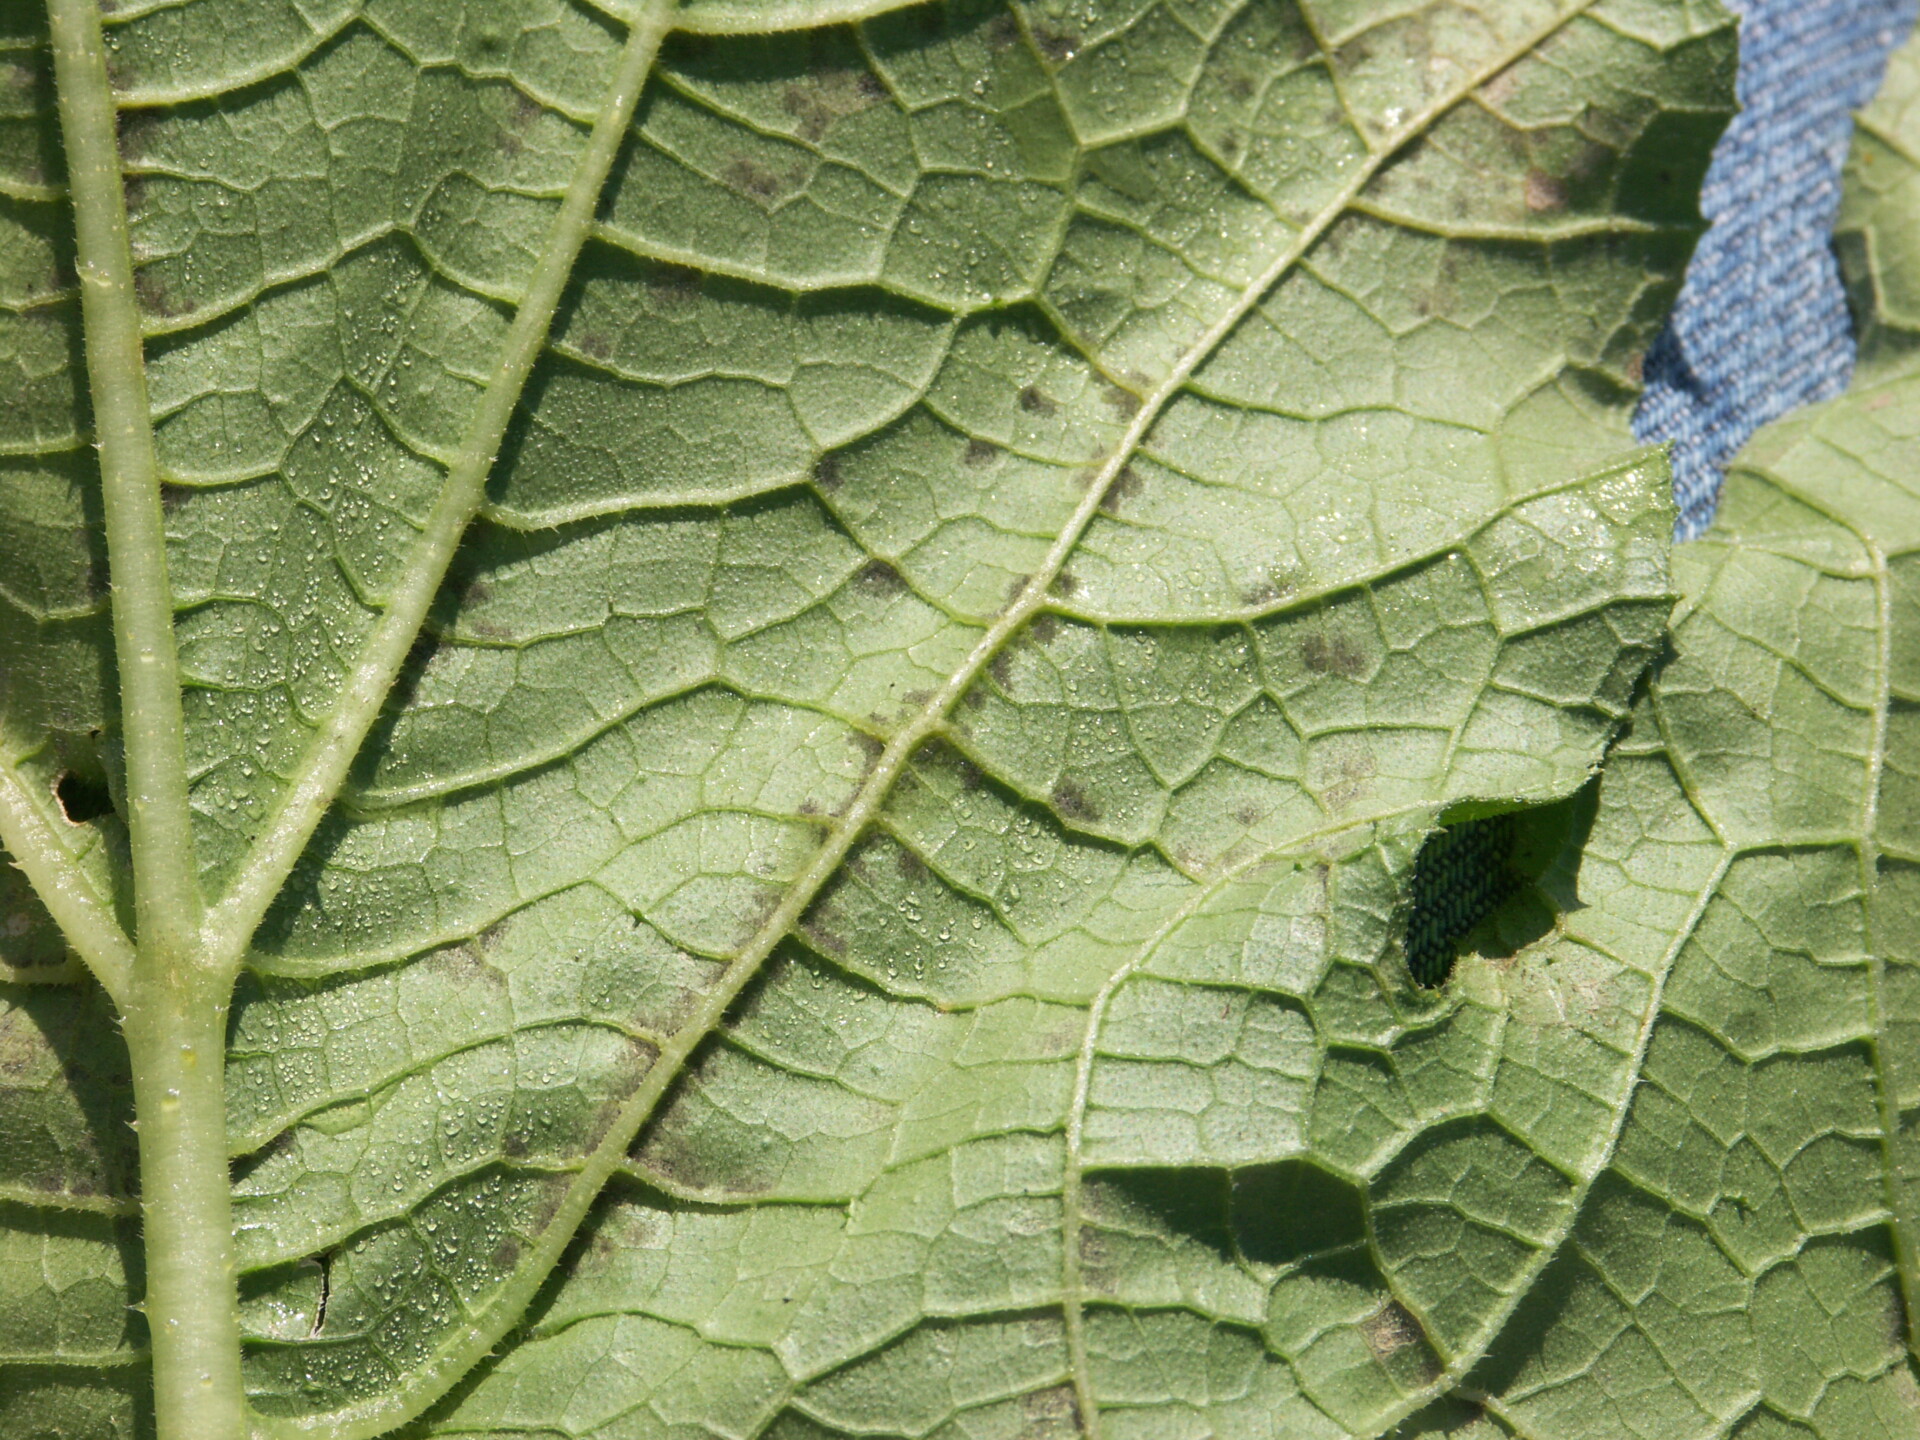 Figure 5. Downy mildew of pumpkin. Sporulation is visible on the underside of the leaf near the vein where moisture has accumulated.